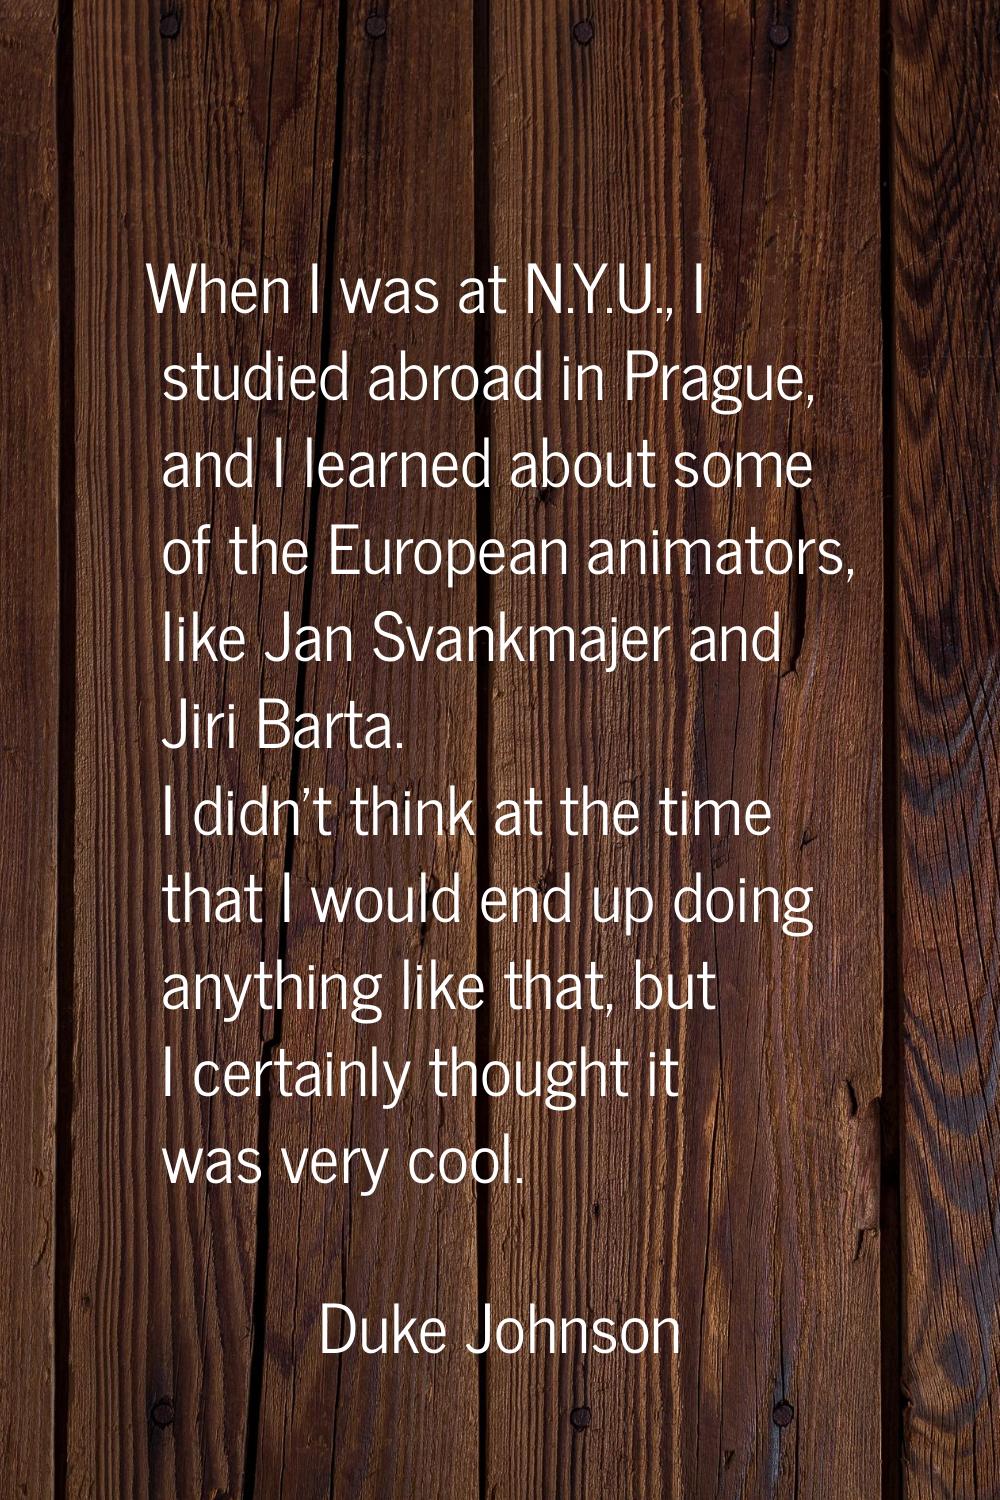 When I was at N.Y.U., I studied abroad in Prague, and I learned about some of the European animator